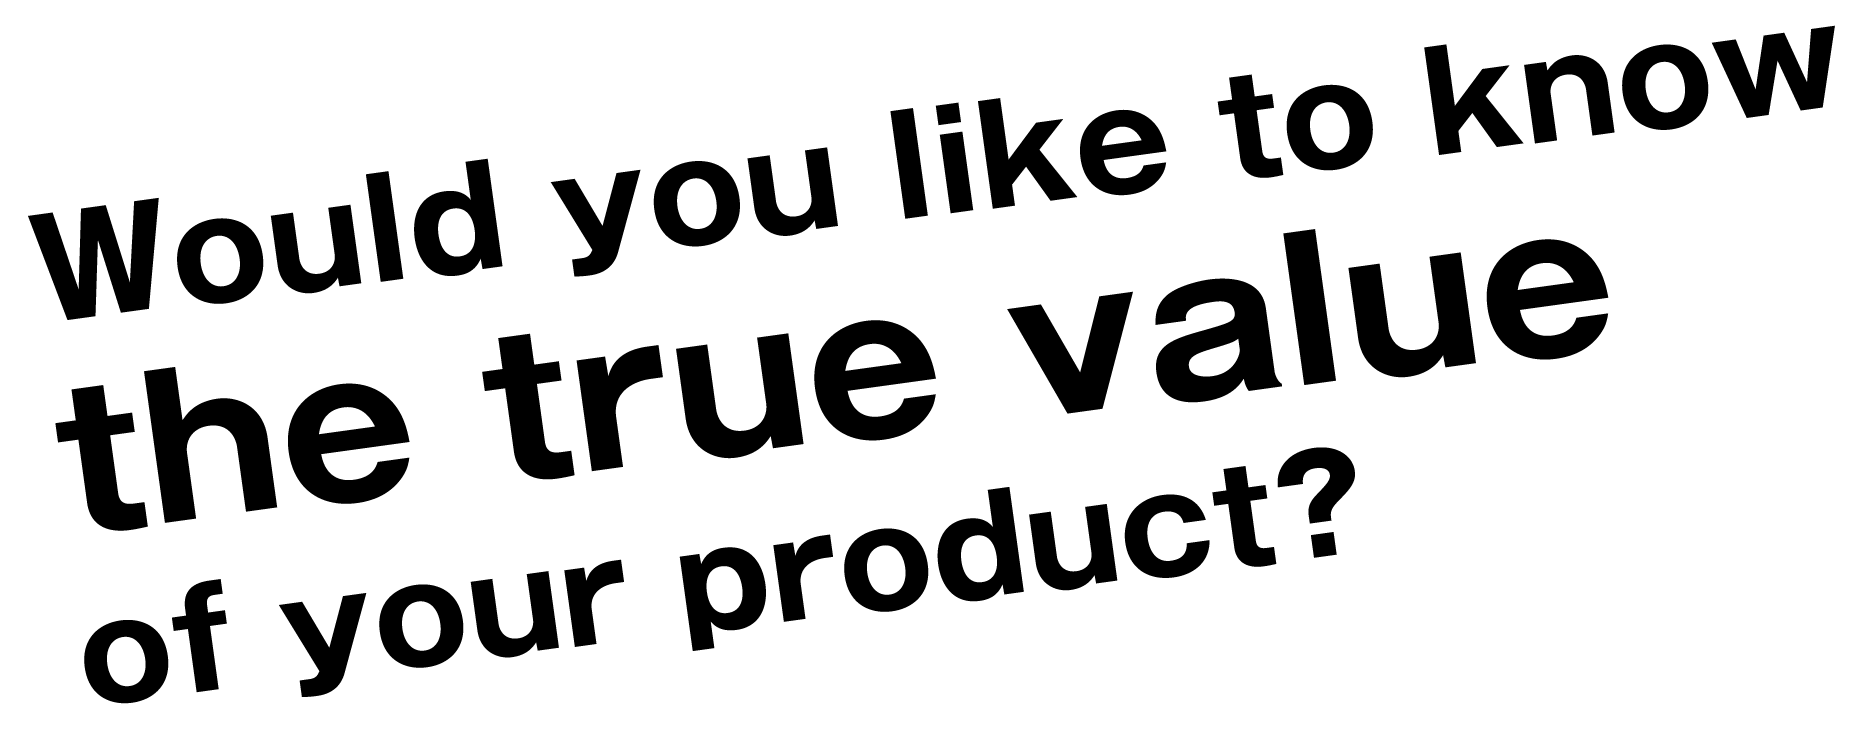 Would you like to know the true value of your product?